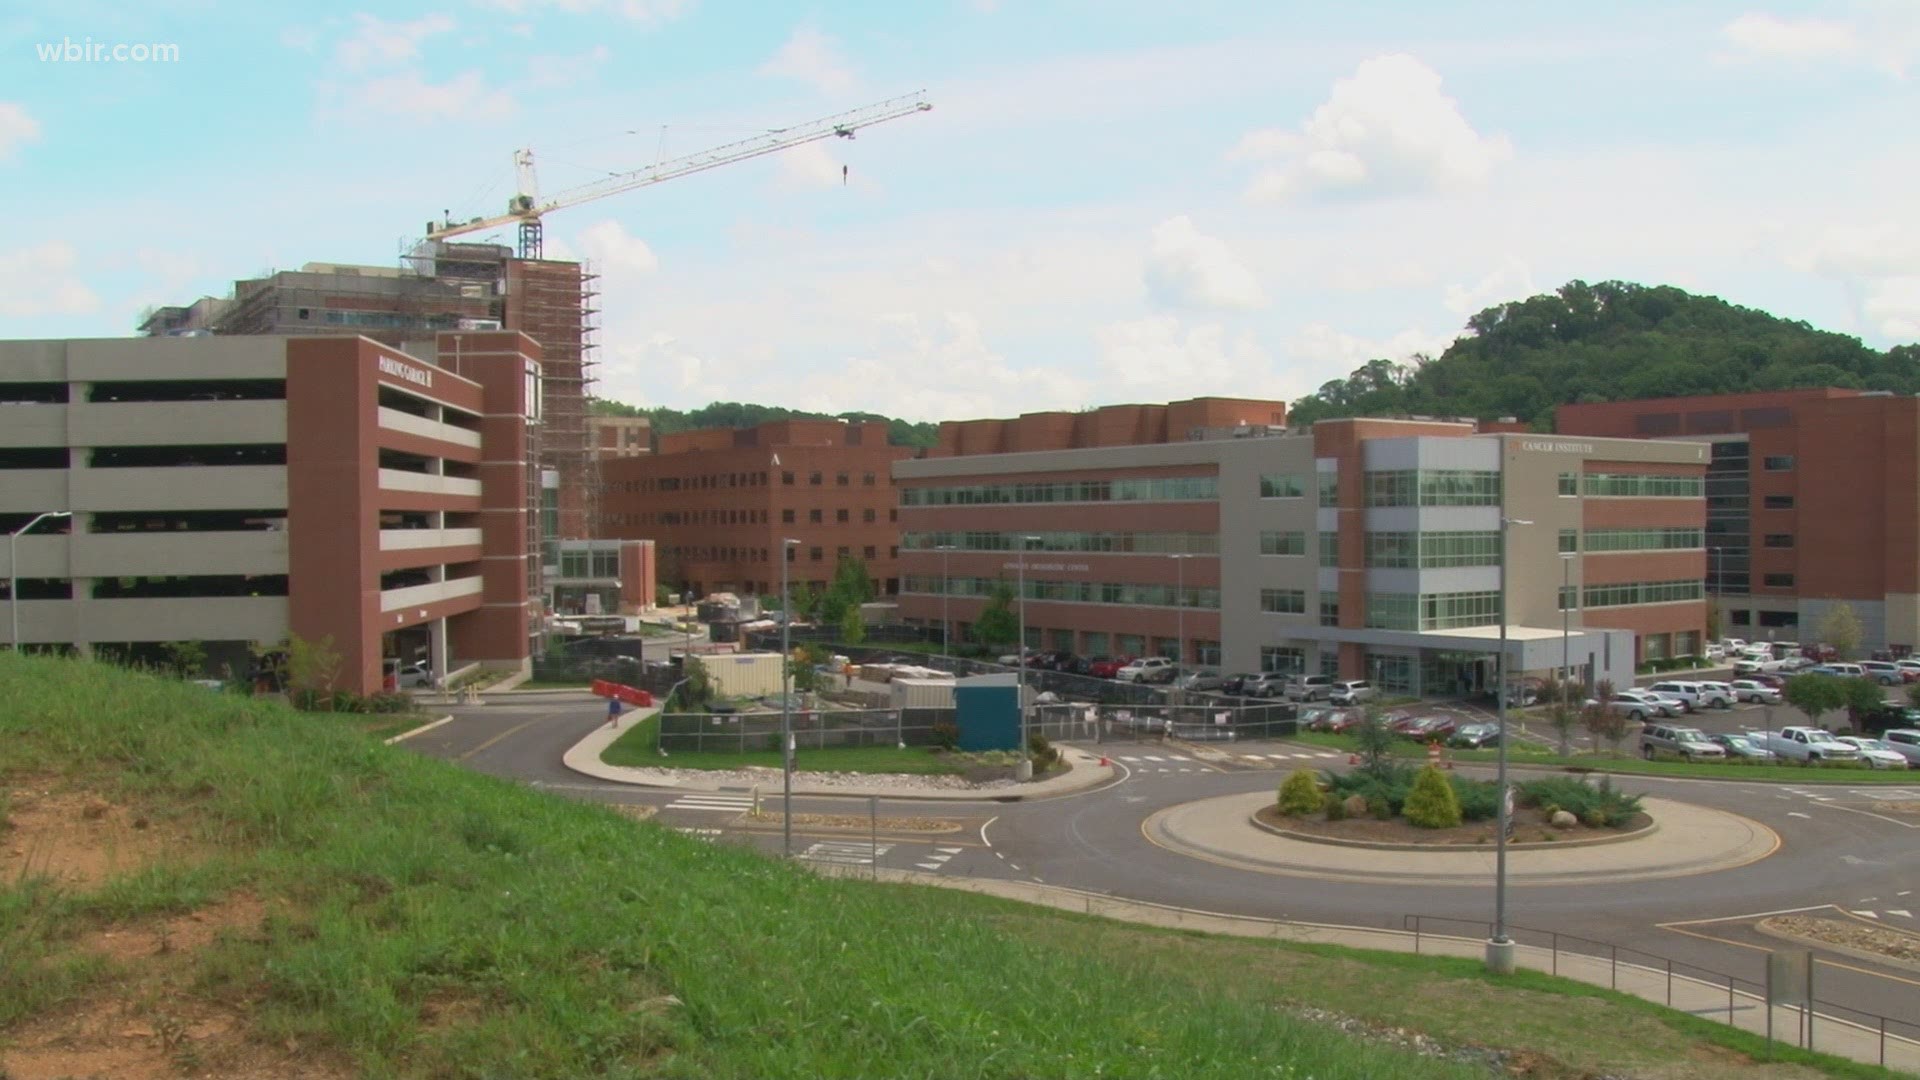 The medical center announced the gift Wednesday morning. It will come through the Natalie and Jim Haslam Fund at the East Tennessee Foundation.